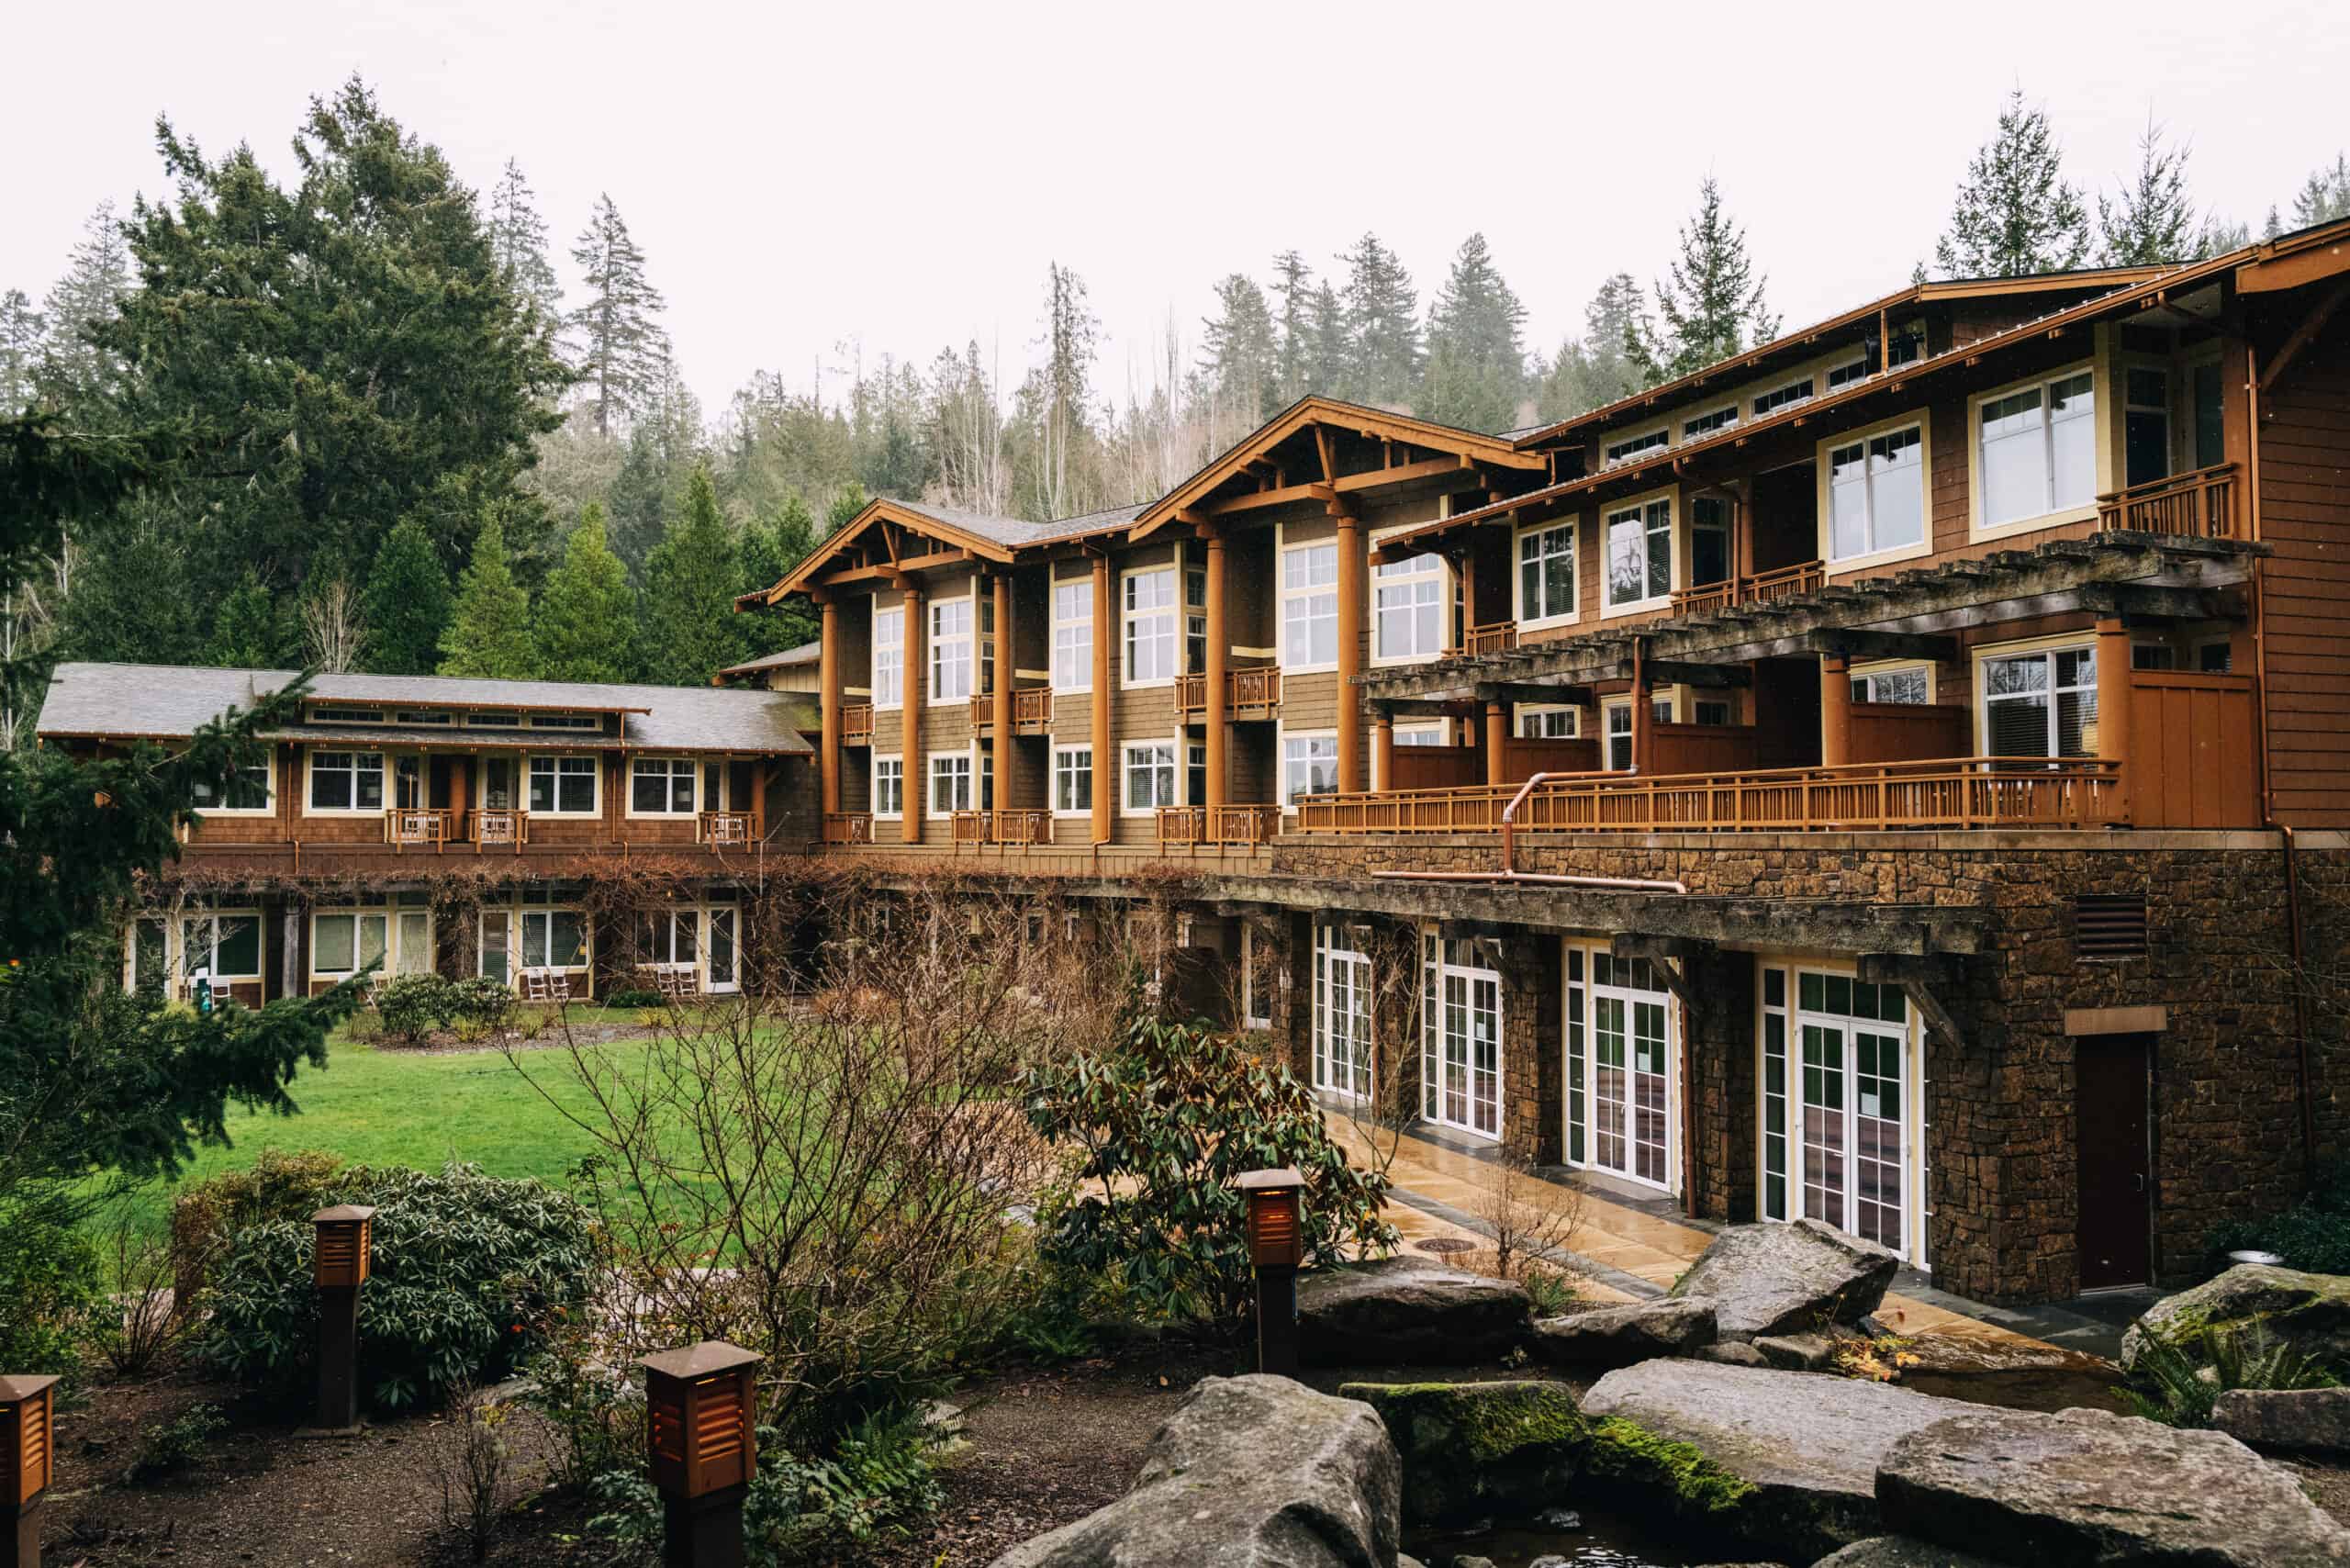 A Dreamy 3 Day Weekend At Alderbrook Resort in Washington State